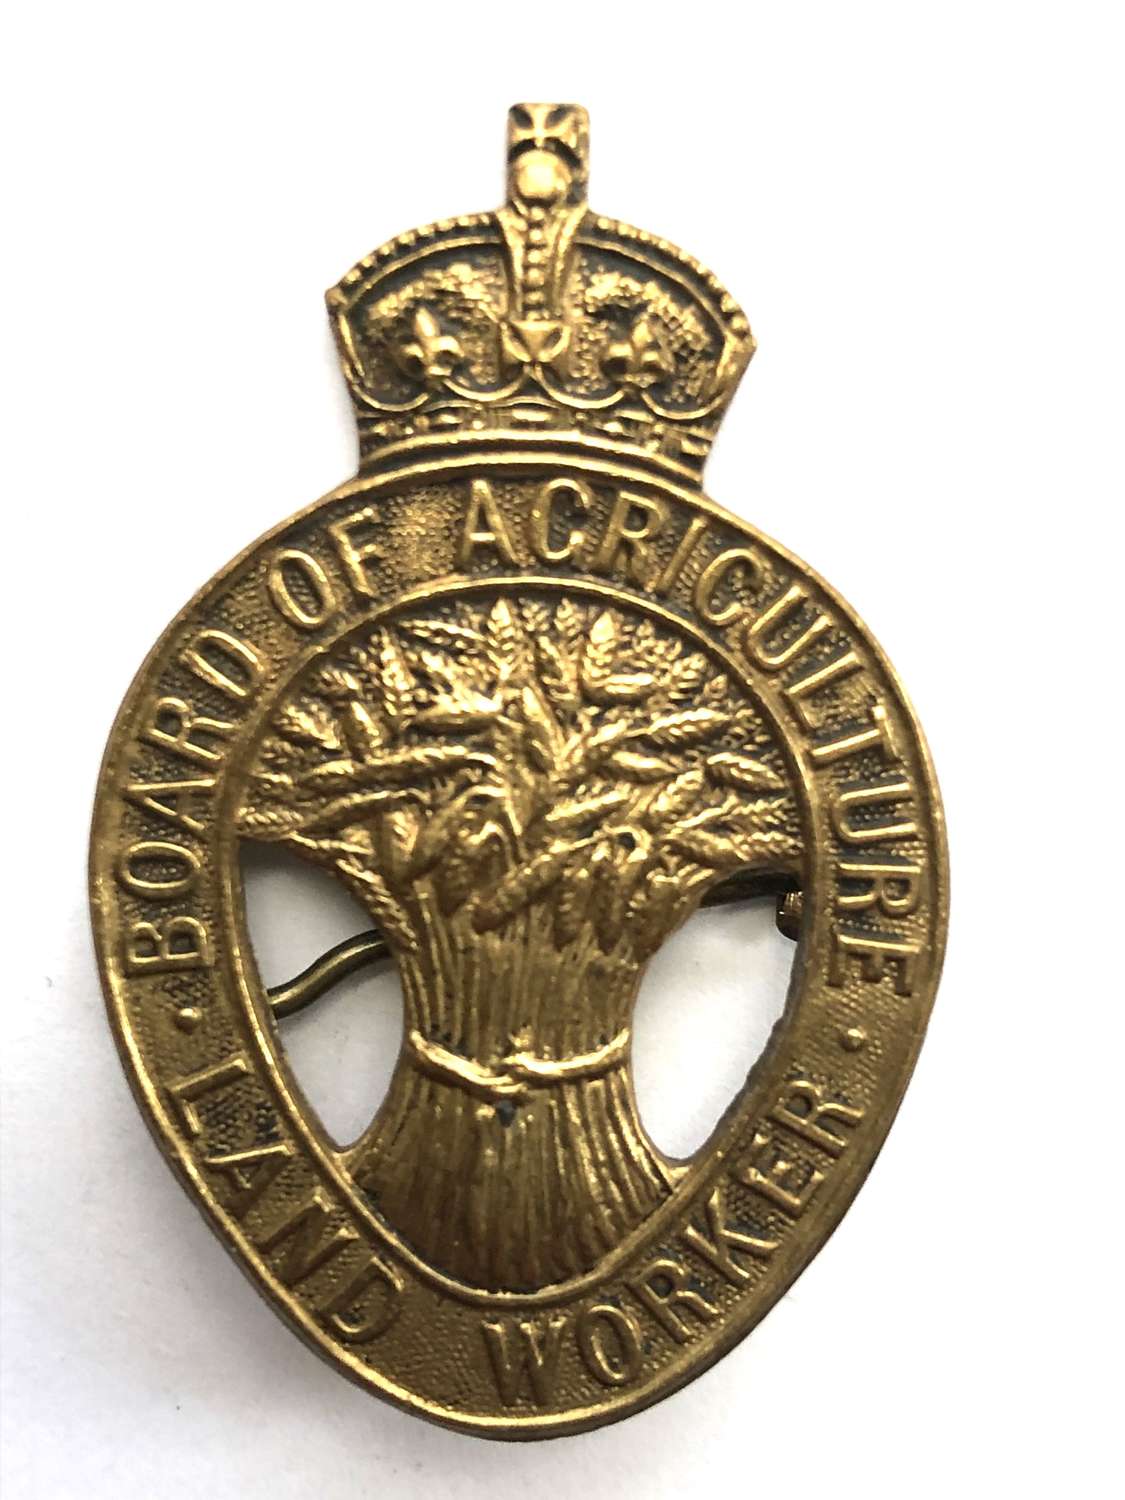 WW1 Board of Agriculture Land Worker women's branch badge